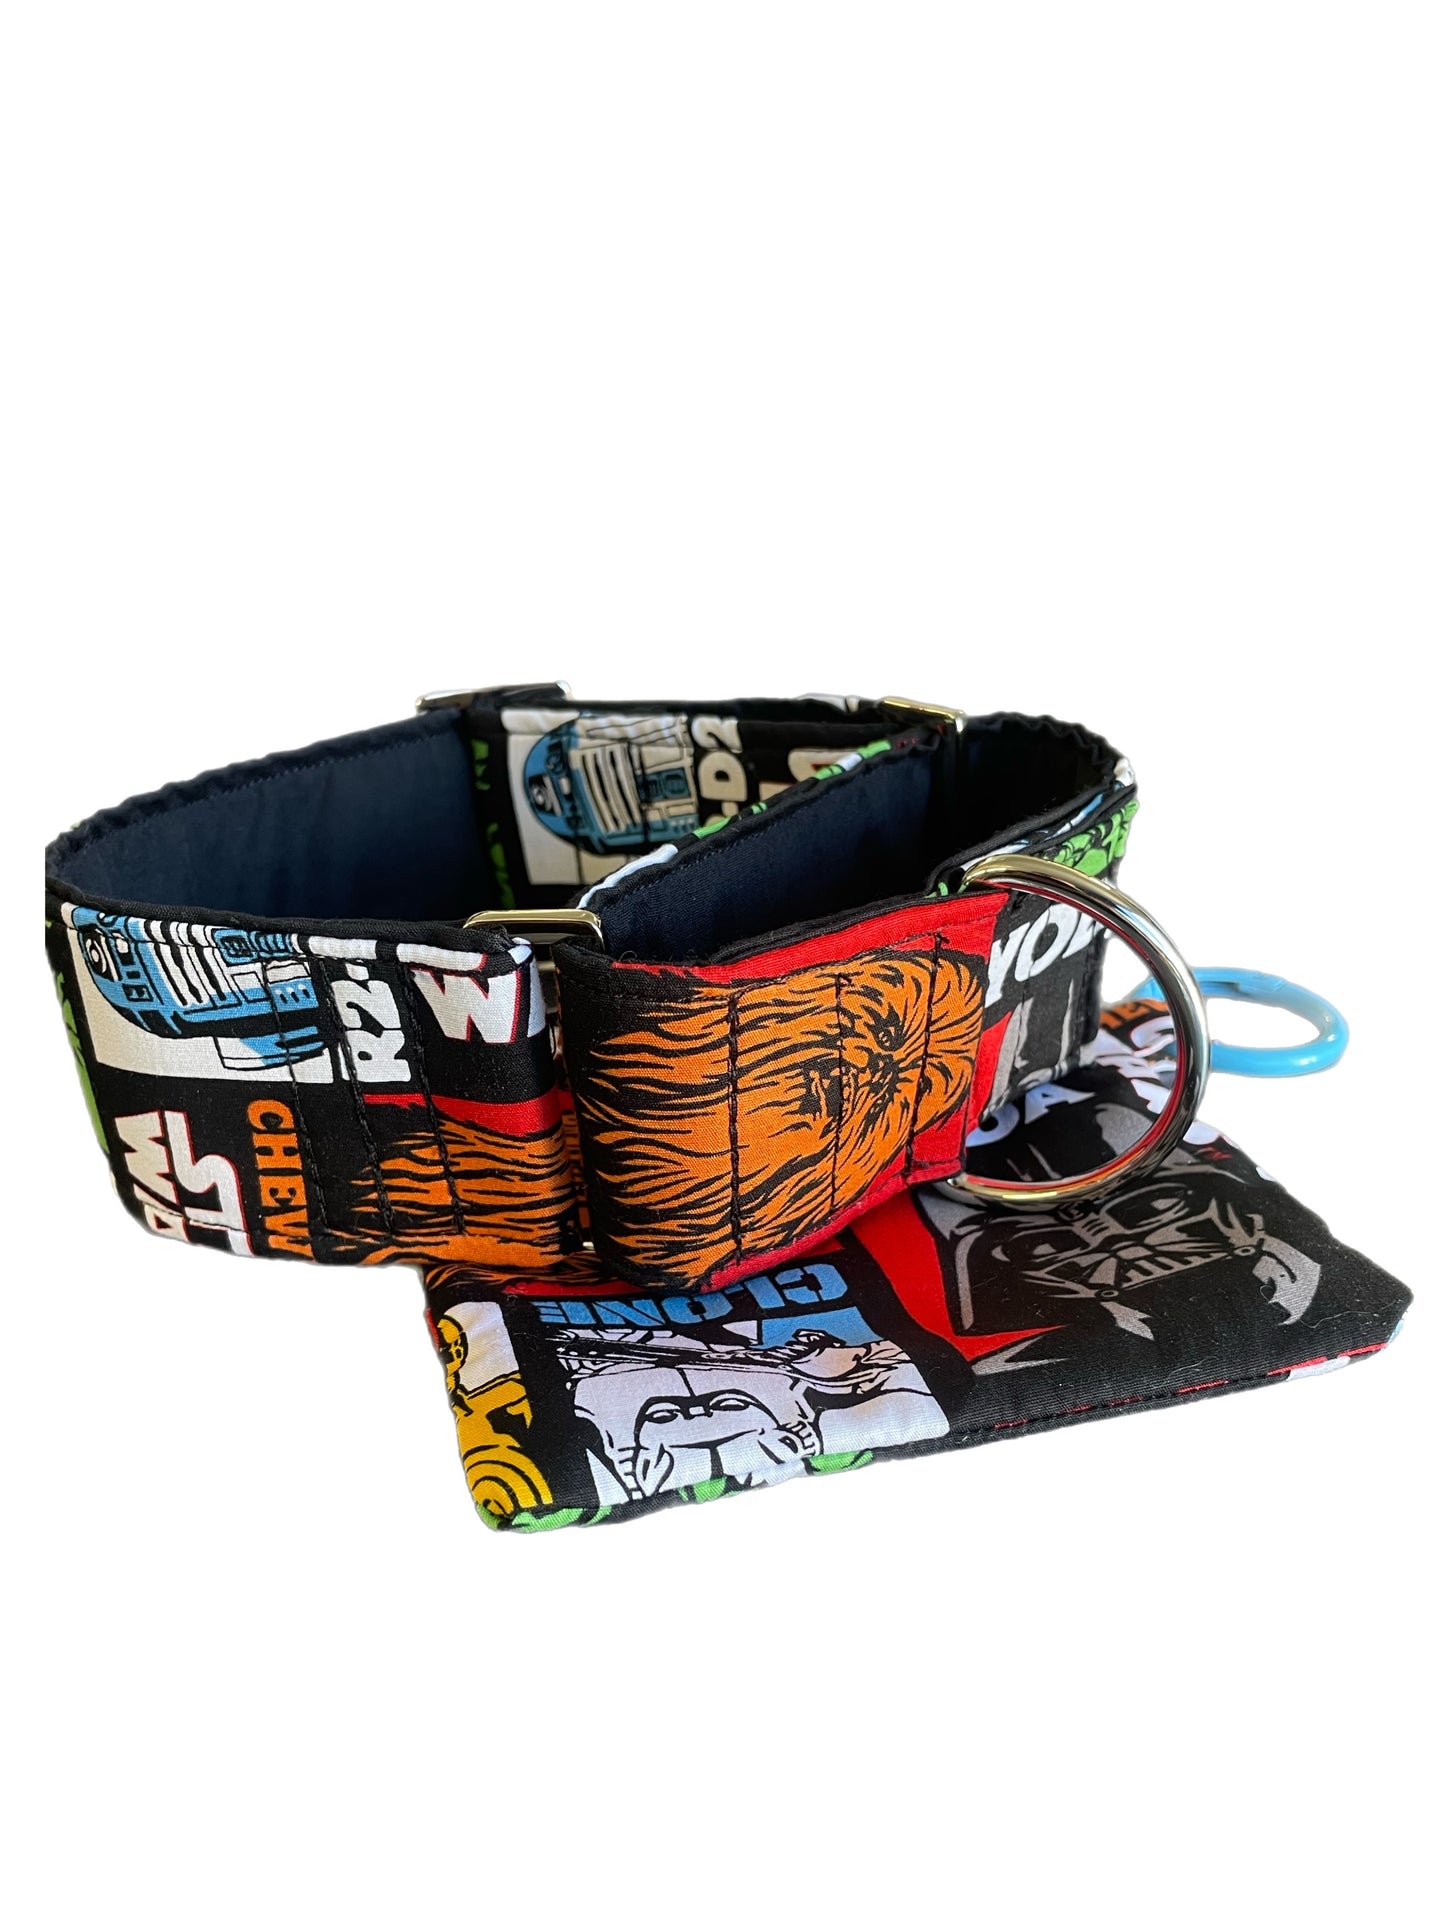 Star Wars bold greyhound Martingale collar cotton fabric covered 50mm width soft